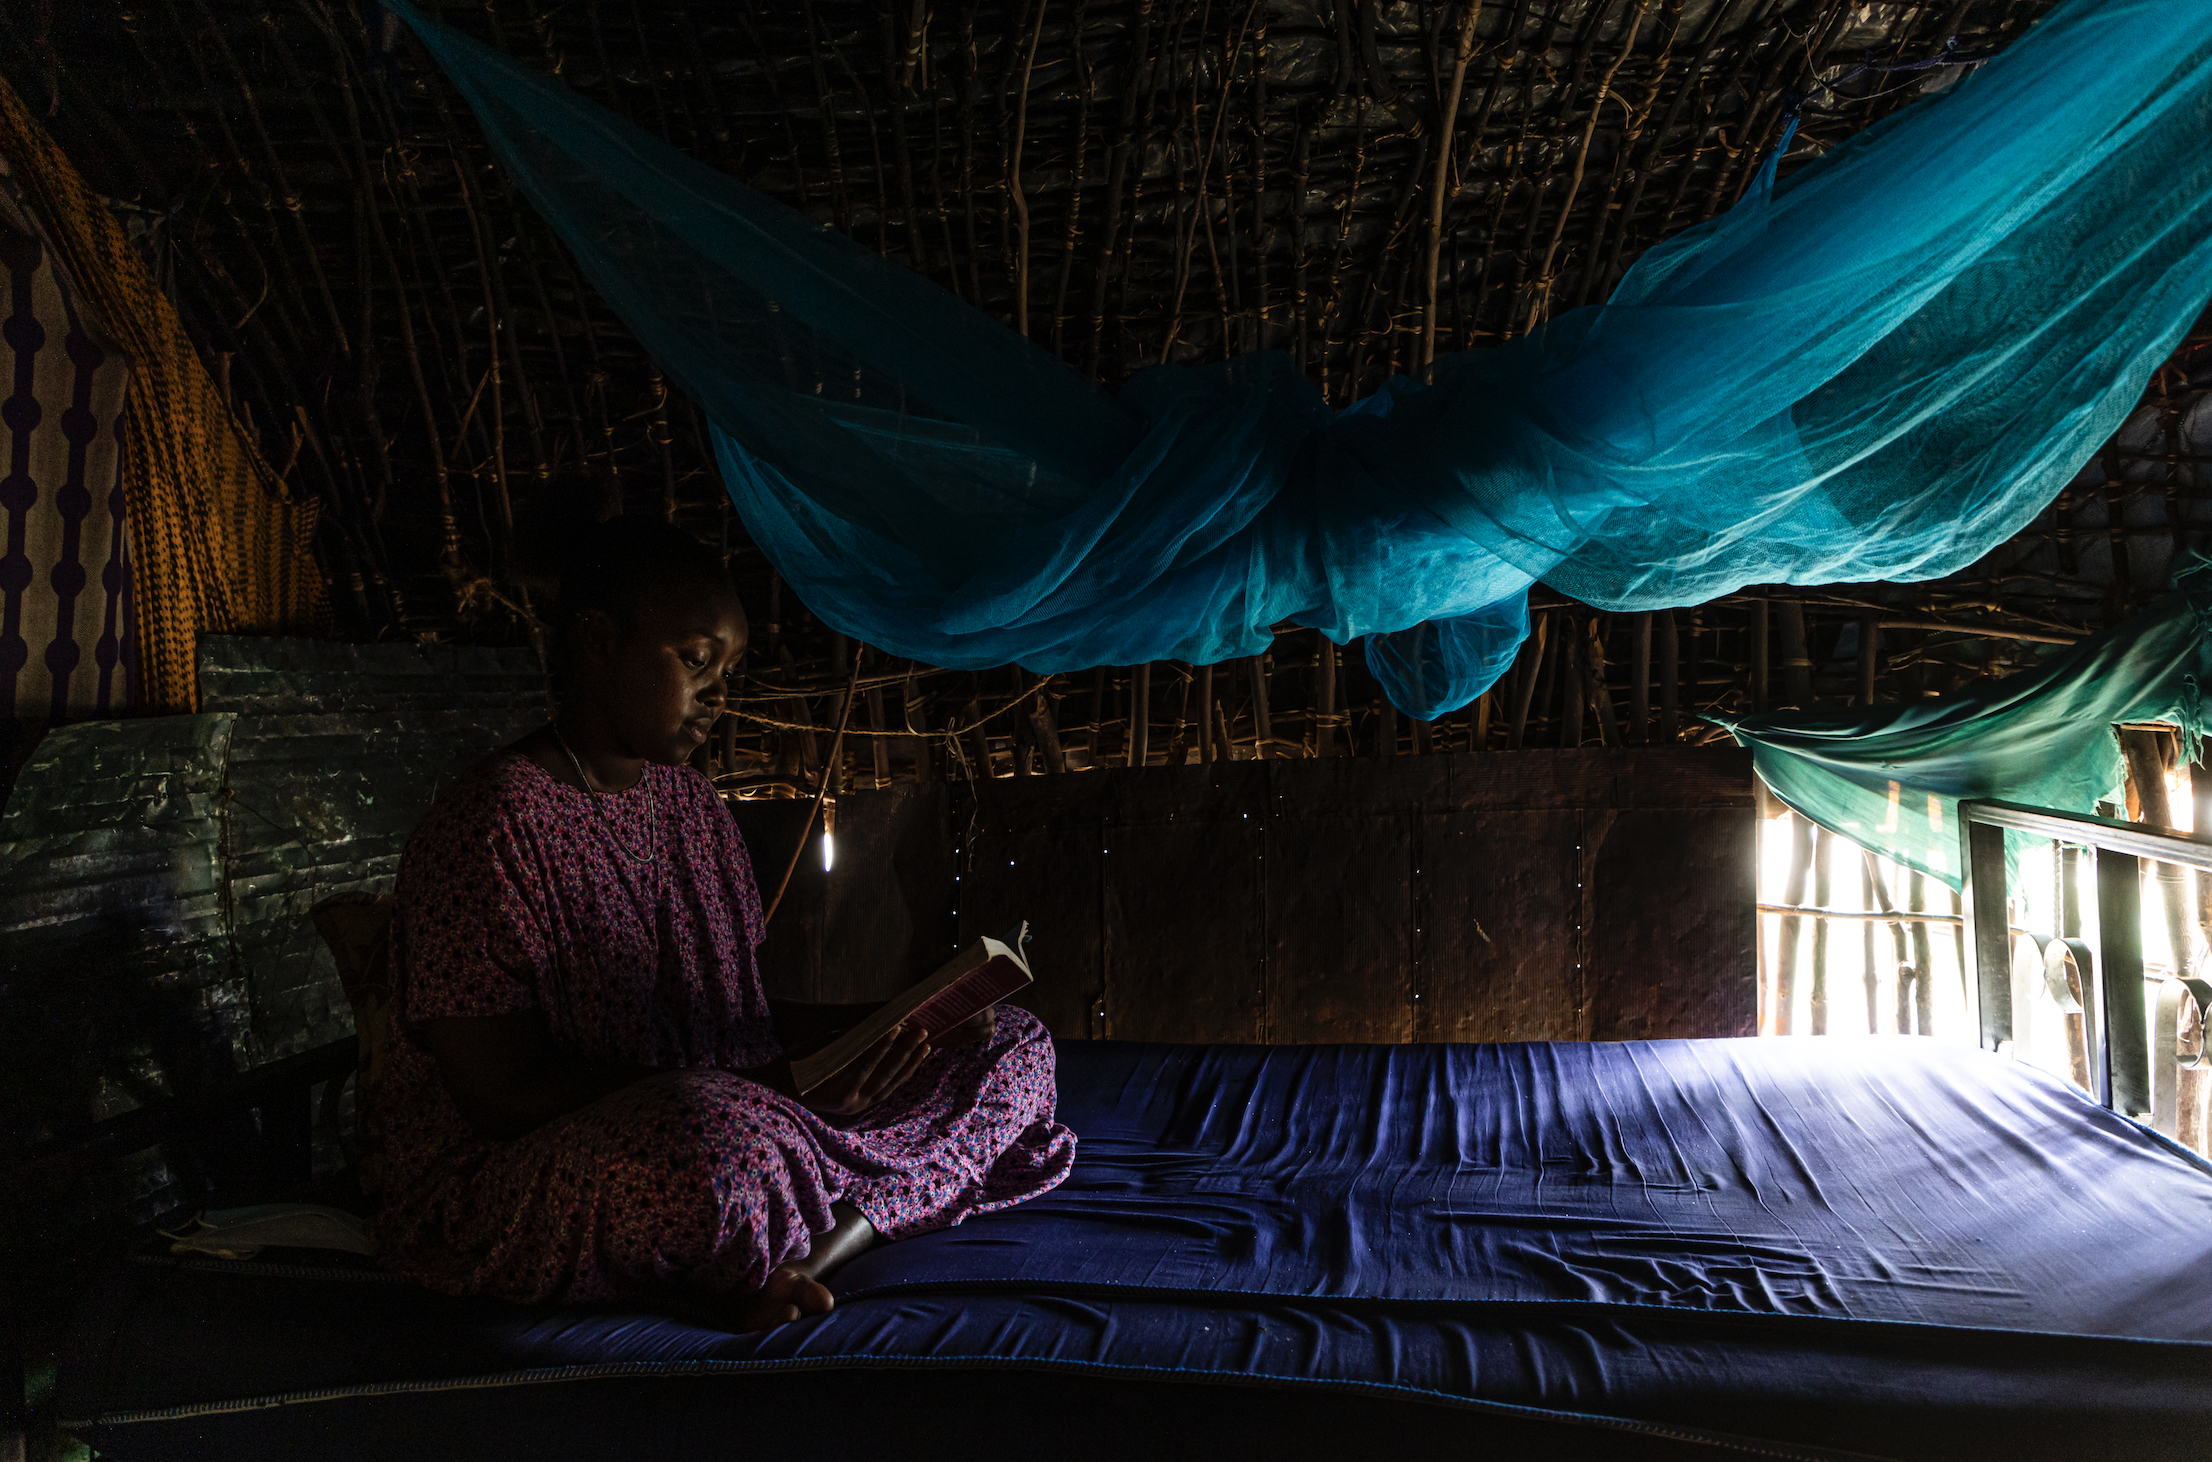 Vicky, an eighteen-year-old girl from Laisamis, experienced negative side effects from FGC when she was cut as a small child more than ten years ago. Image by Will Swanson. Kenya, 2020.